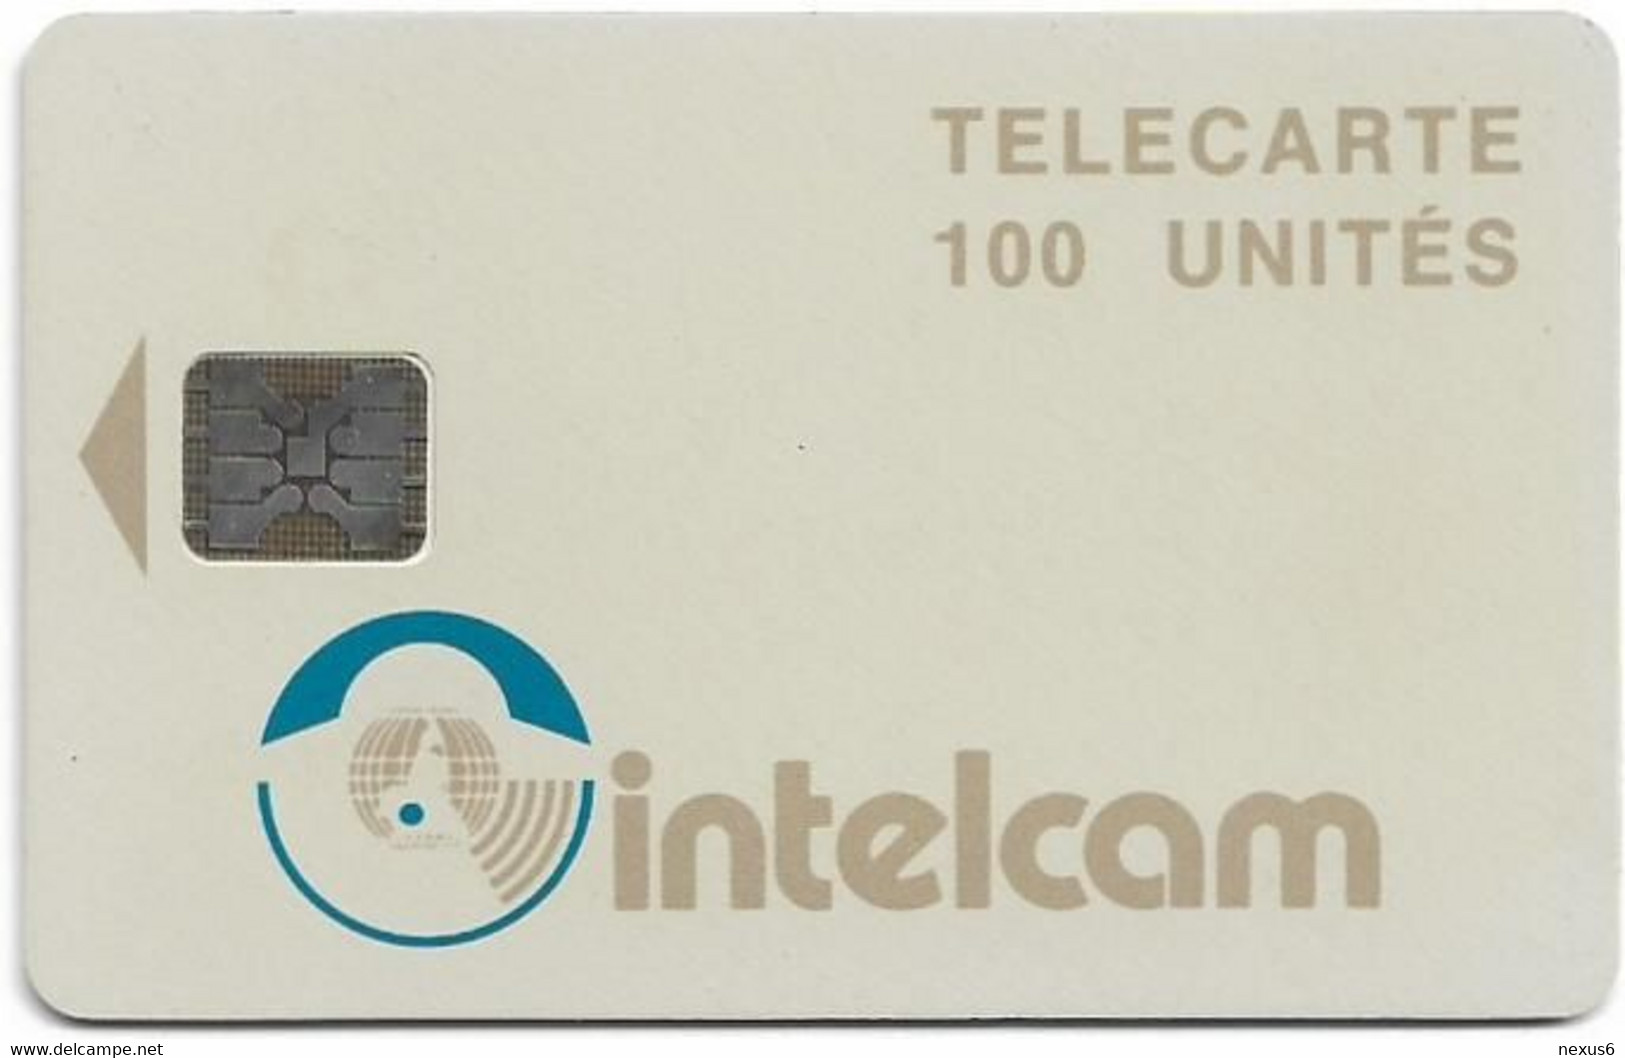 Cameroon - Intelcam - Chip - Logo Card - SC5 ISO, Glossy, Cn.C46100859, 100Units, Used - Cameroon